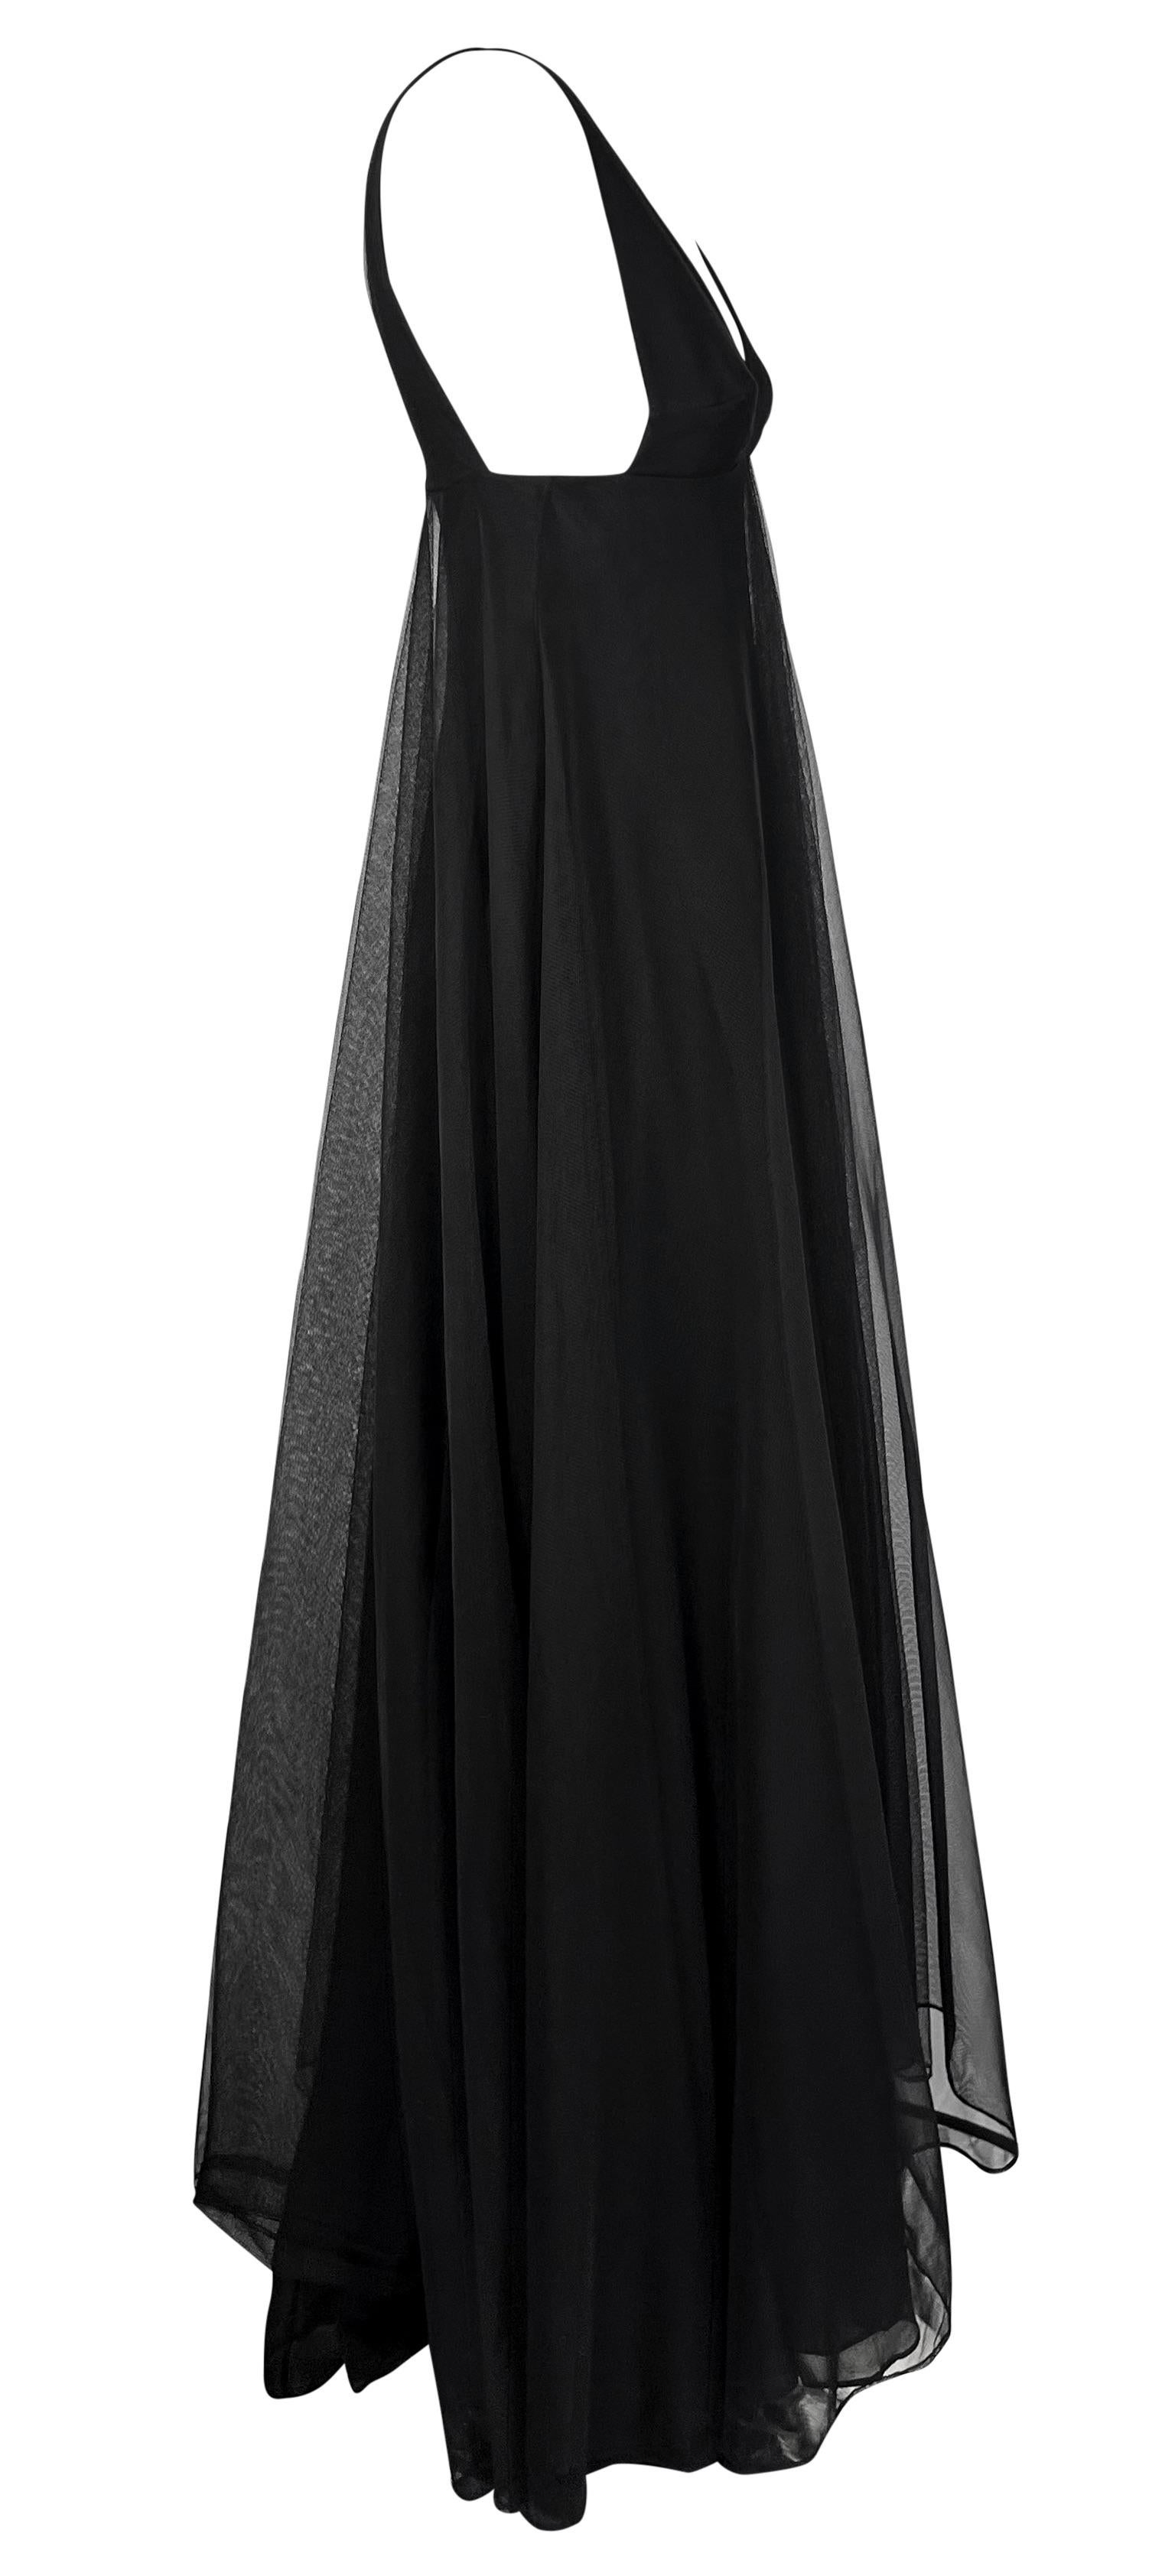 F/W 1998 Gucci by Tom Ford Runway Black Layered Tulle Sheer Plunge Gown For Sale 6